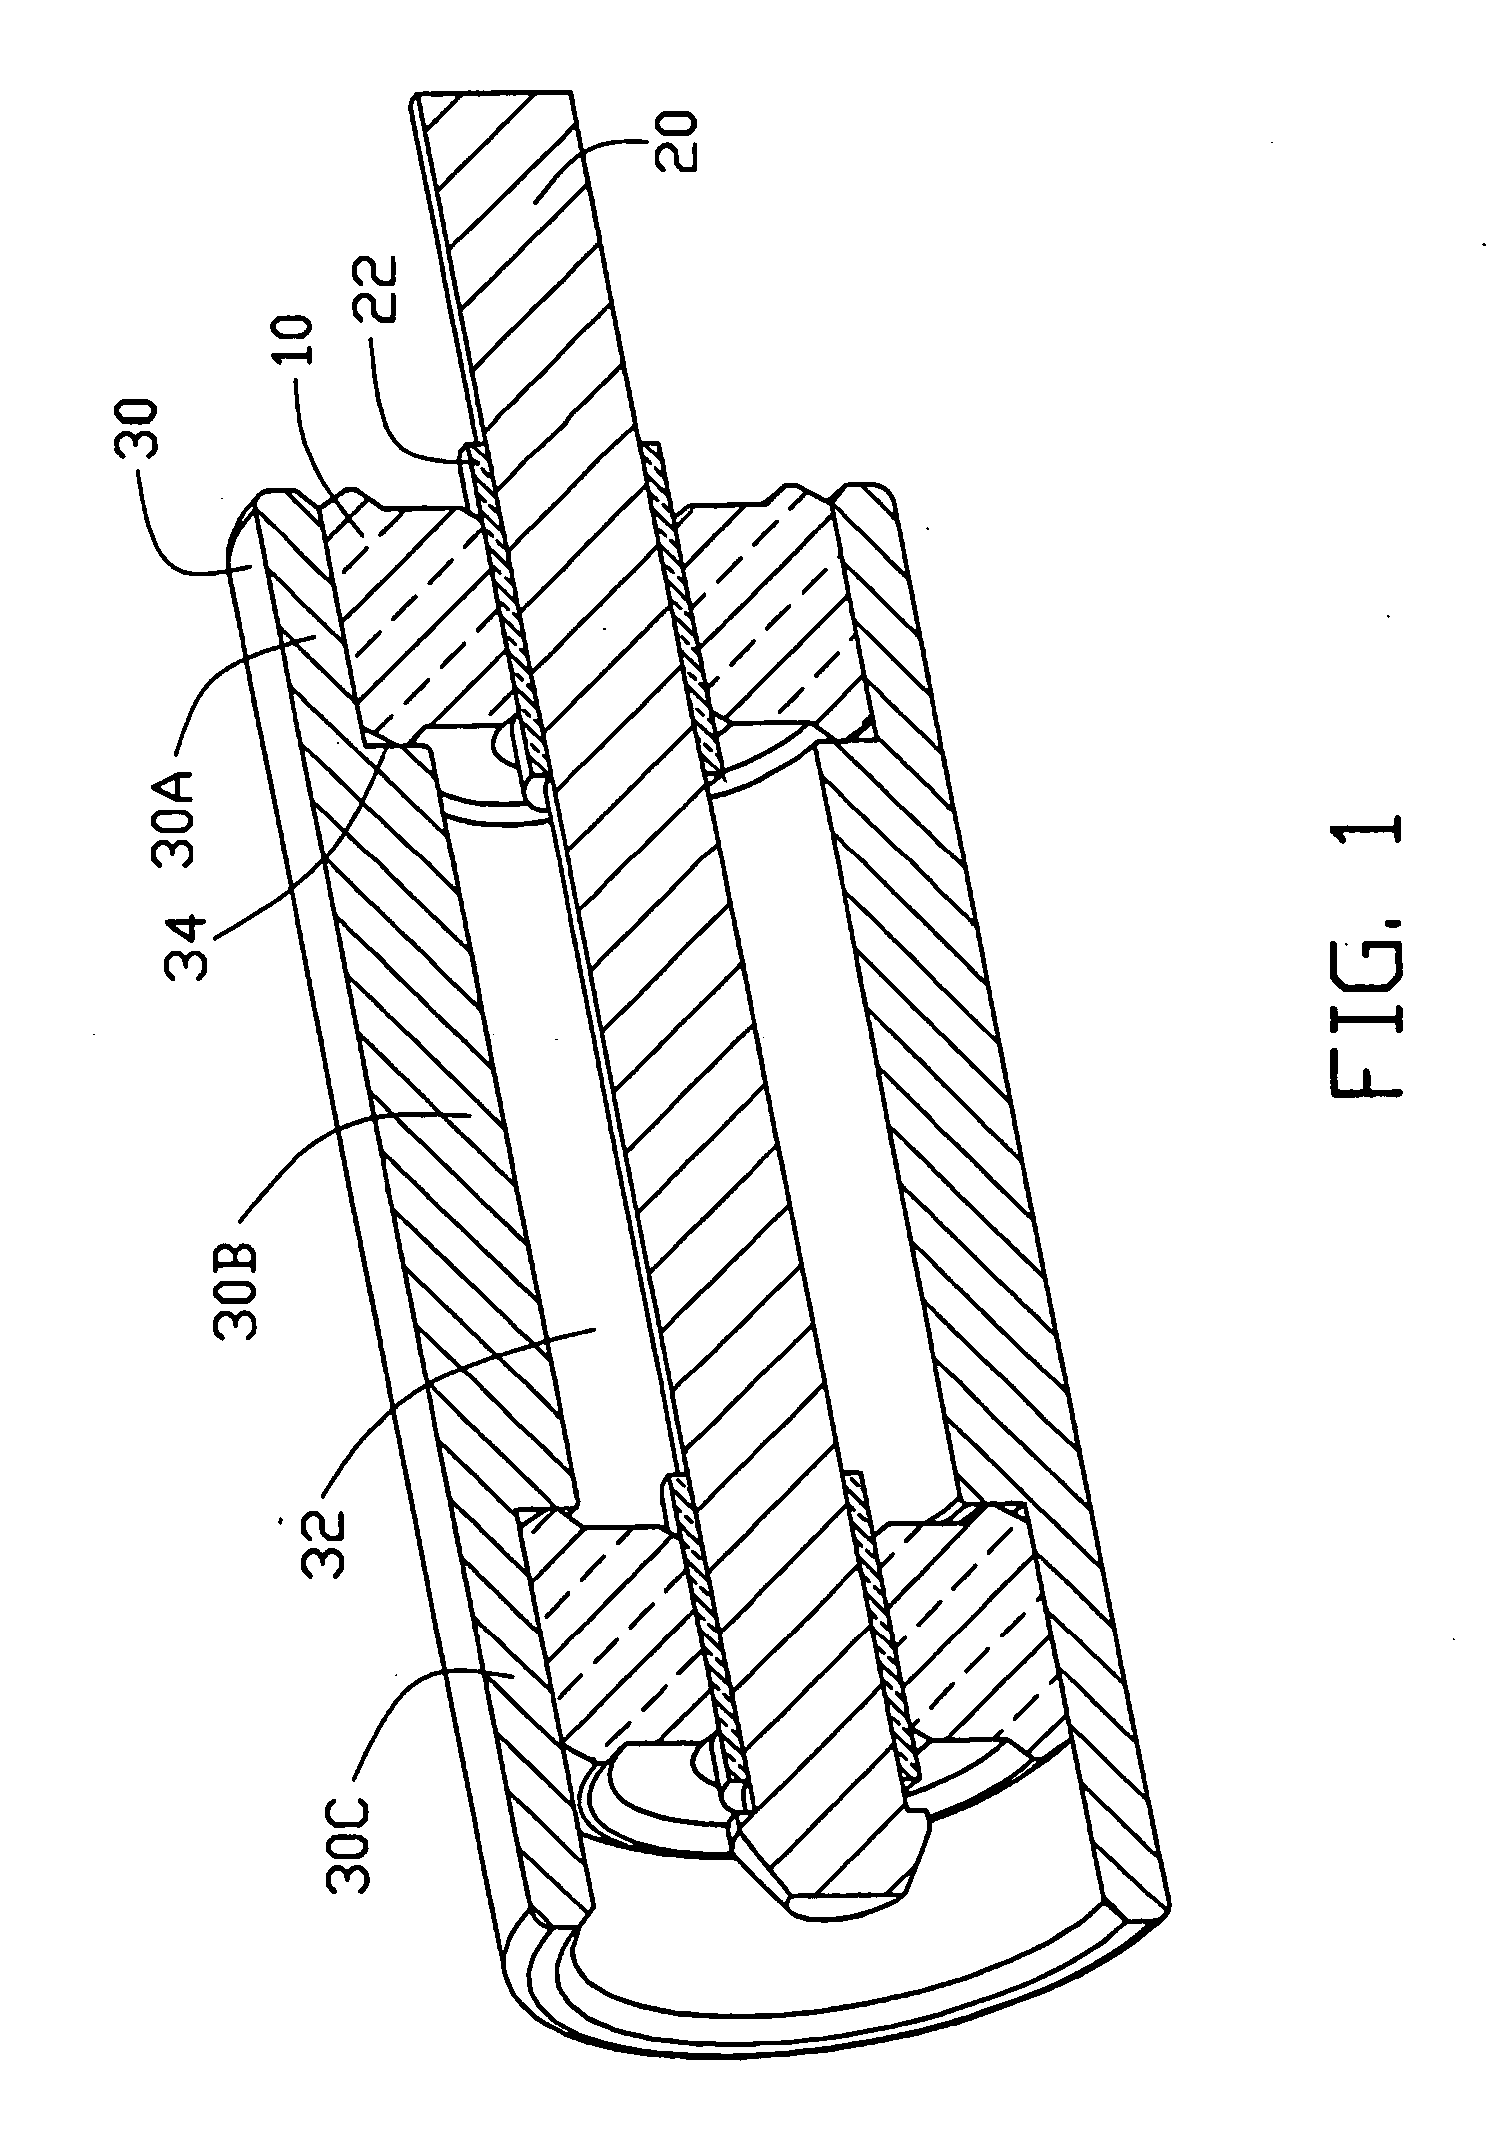 Bearing assembly with wear-resistant bearing surfaces